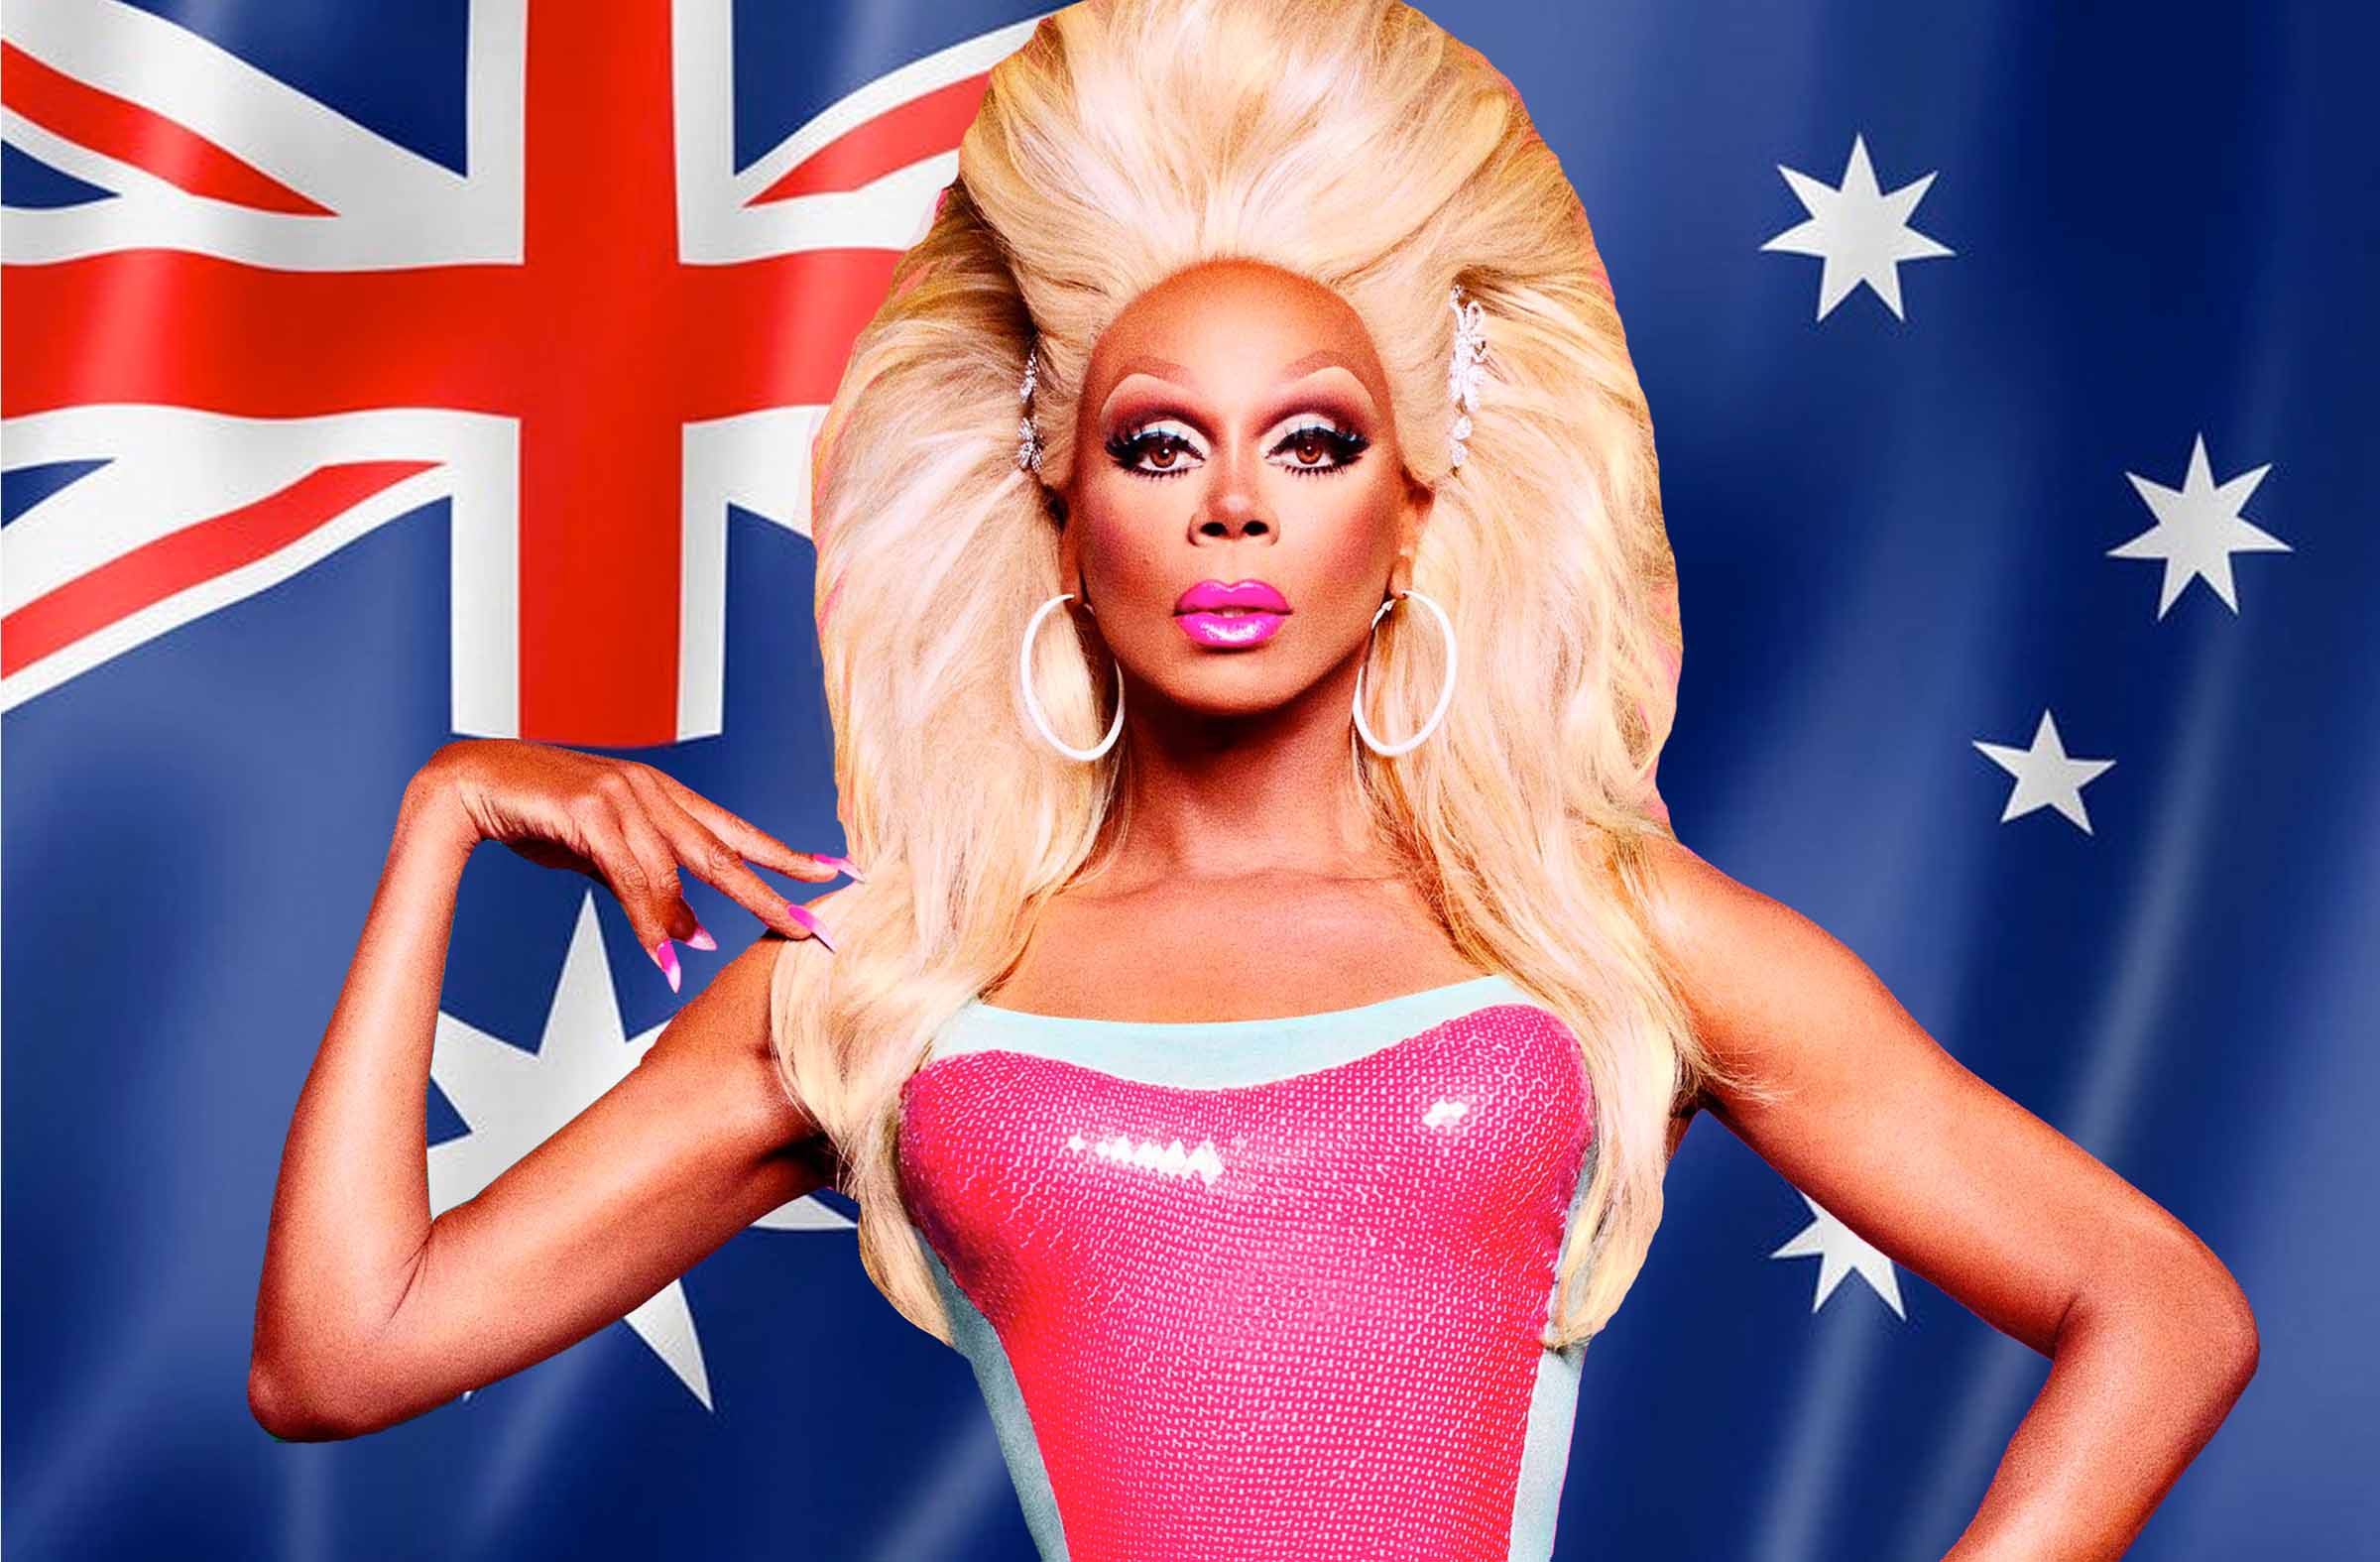 drag race down under episode 5 dailymotion